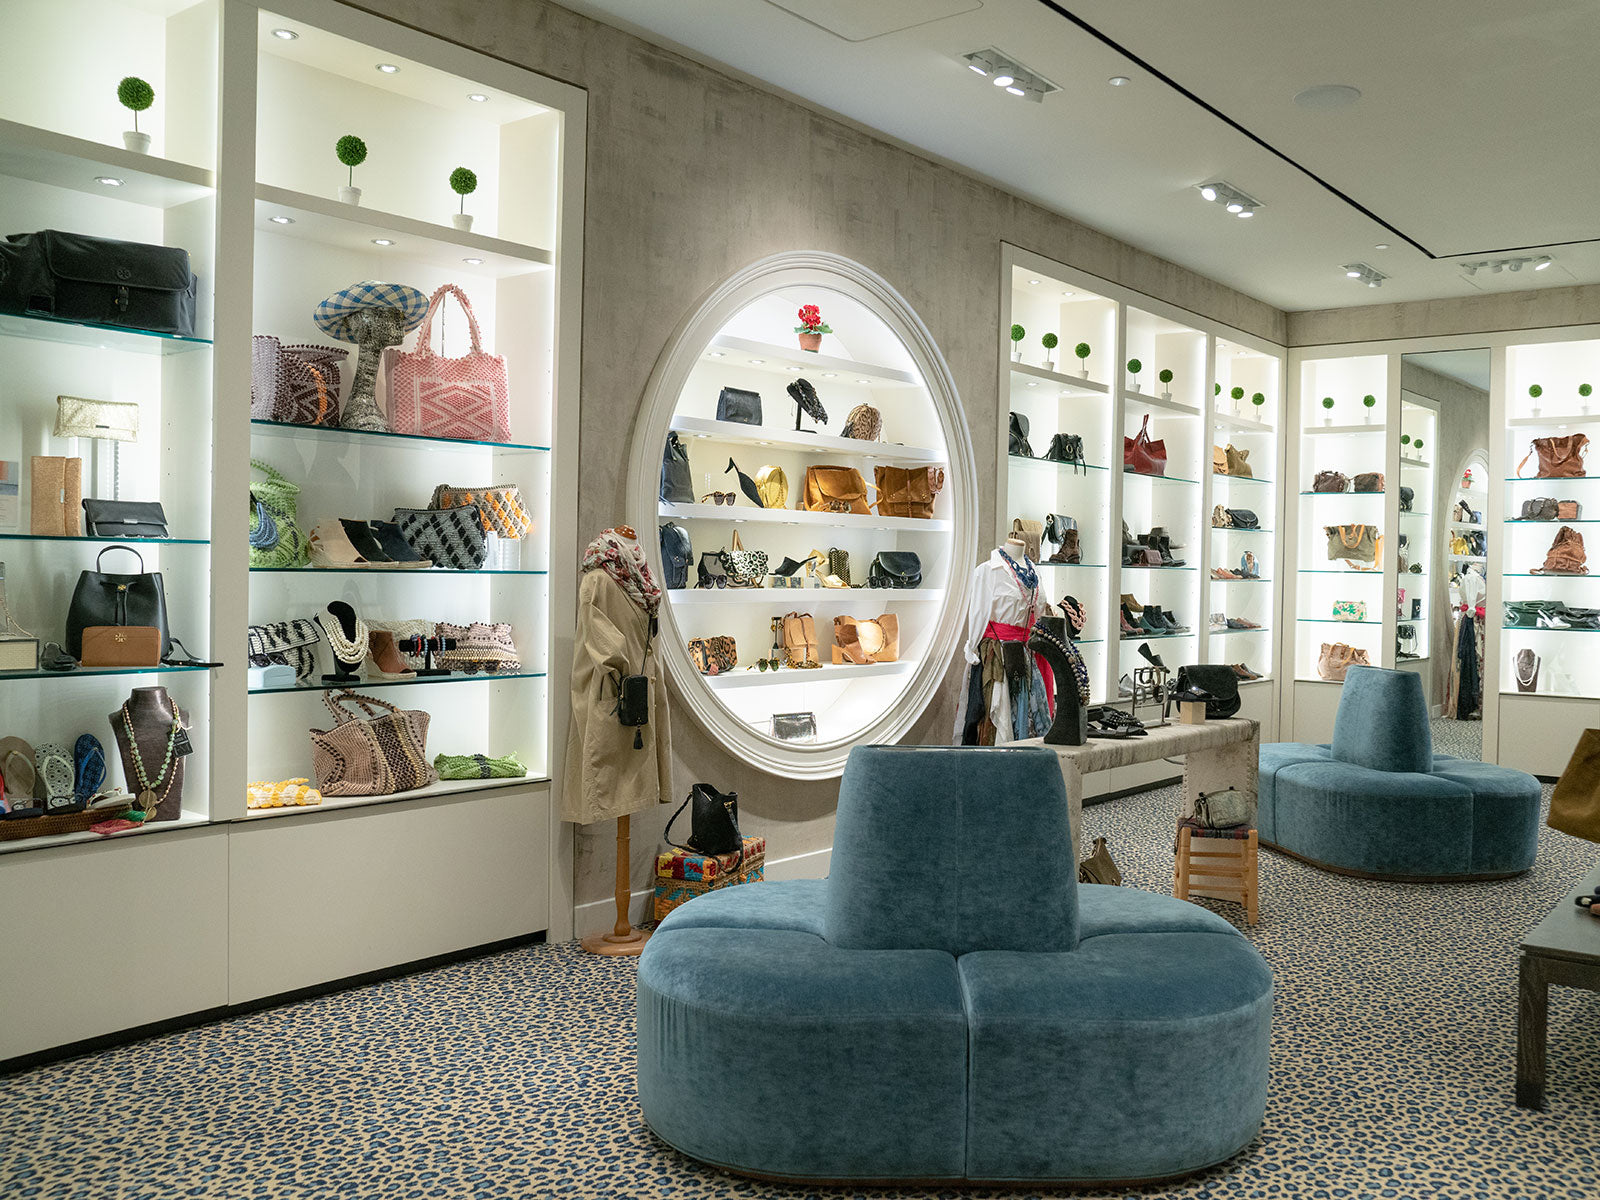 Style: At last, Louis Vuitton store opens in Galleria in Edina